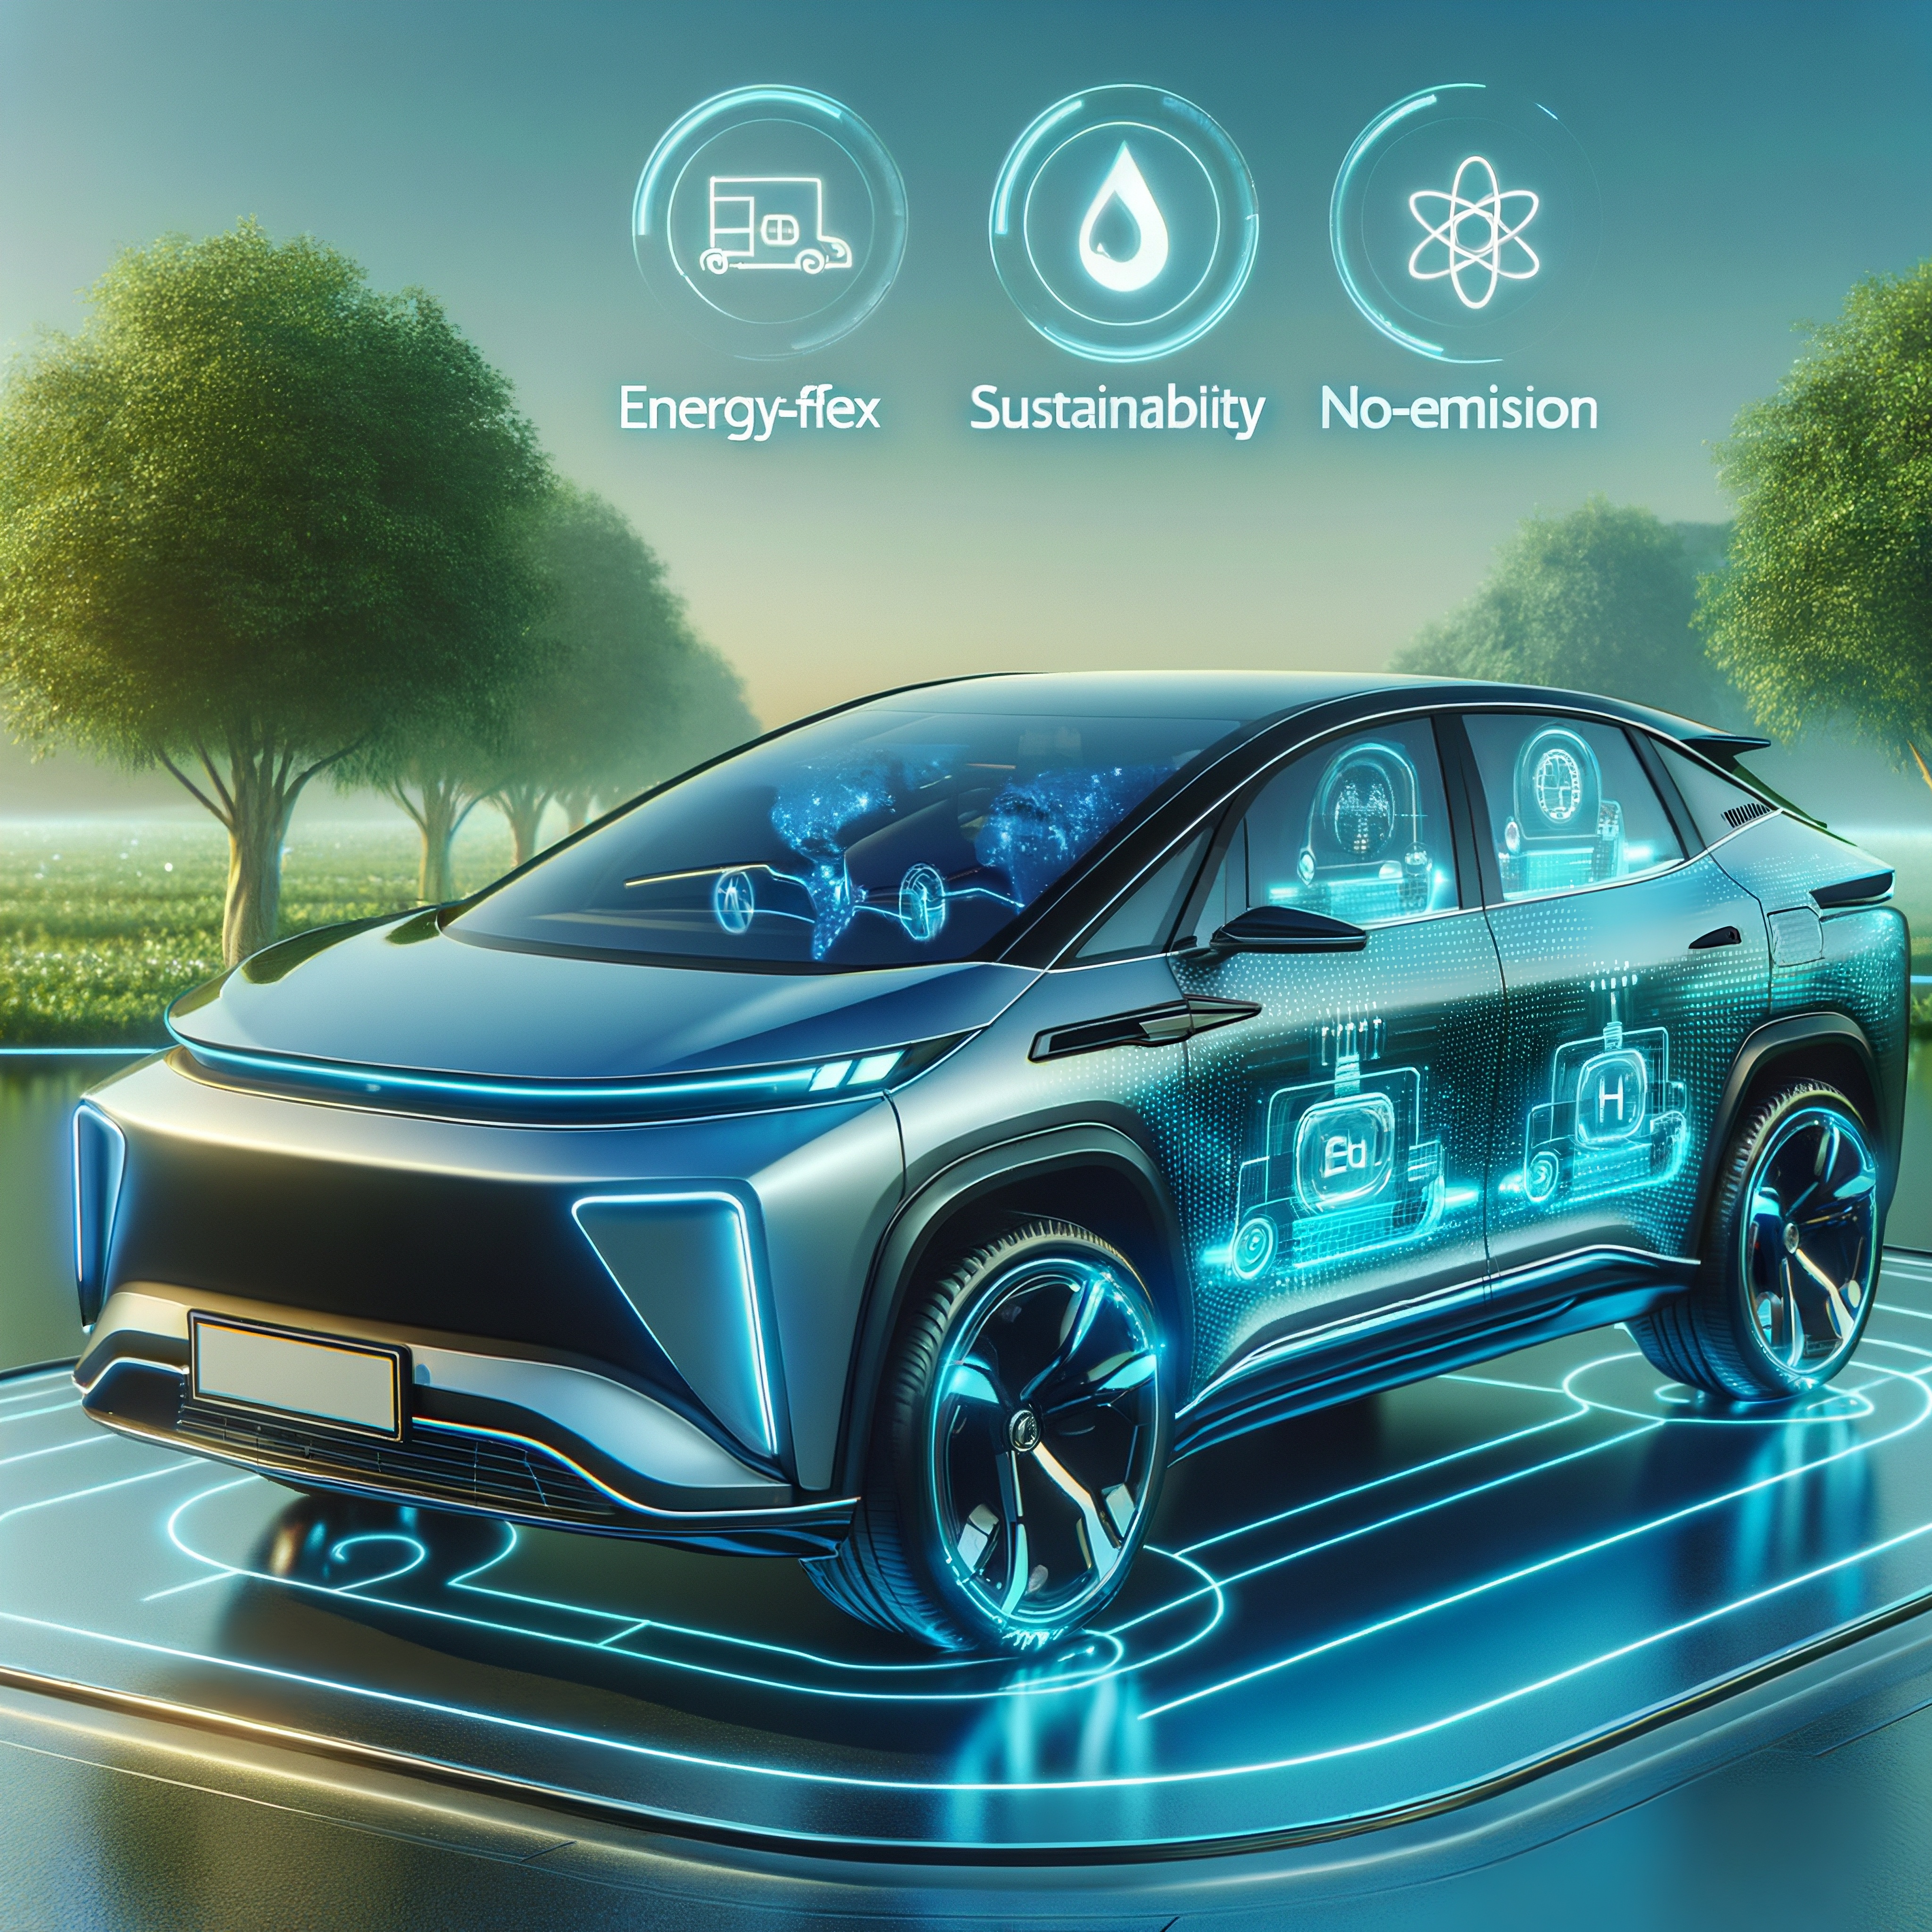 Monograph: Automotive-sized and affordable hydrogen sensors produced using MEMS can stimulate the hydrogen energy application market